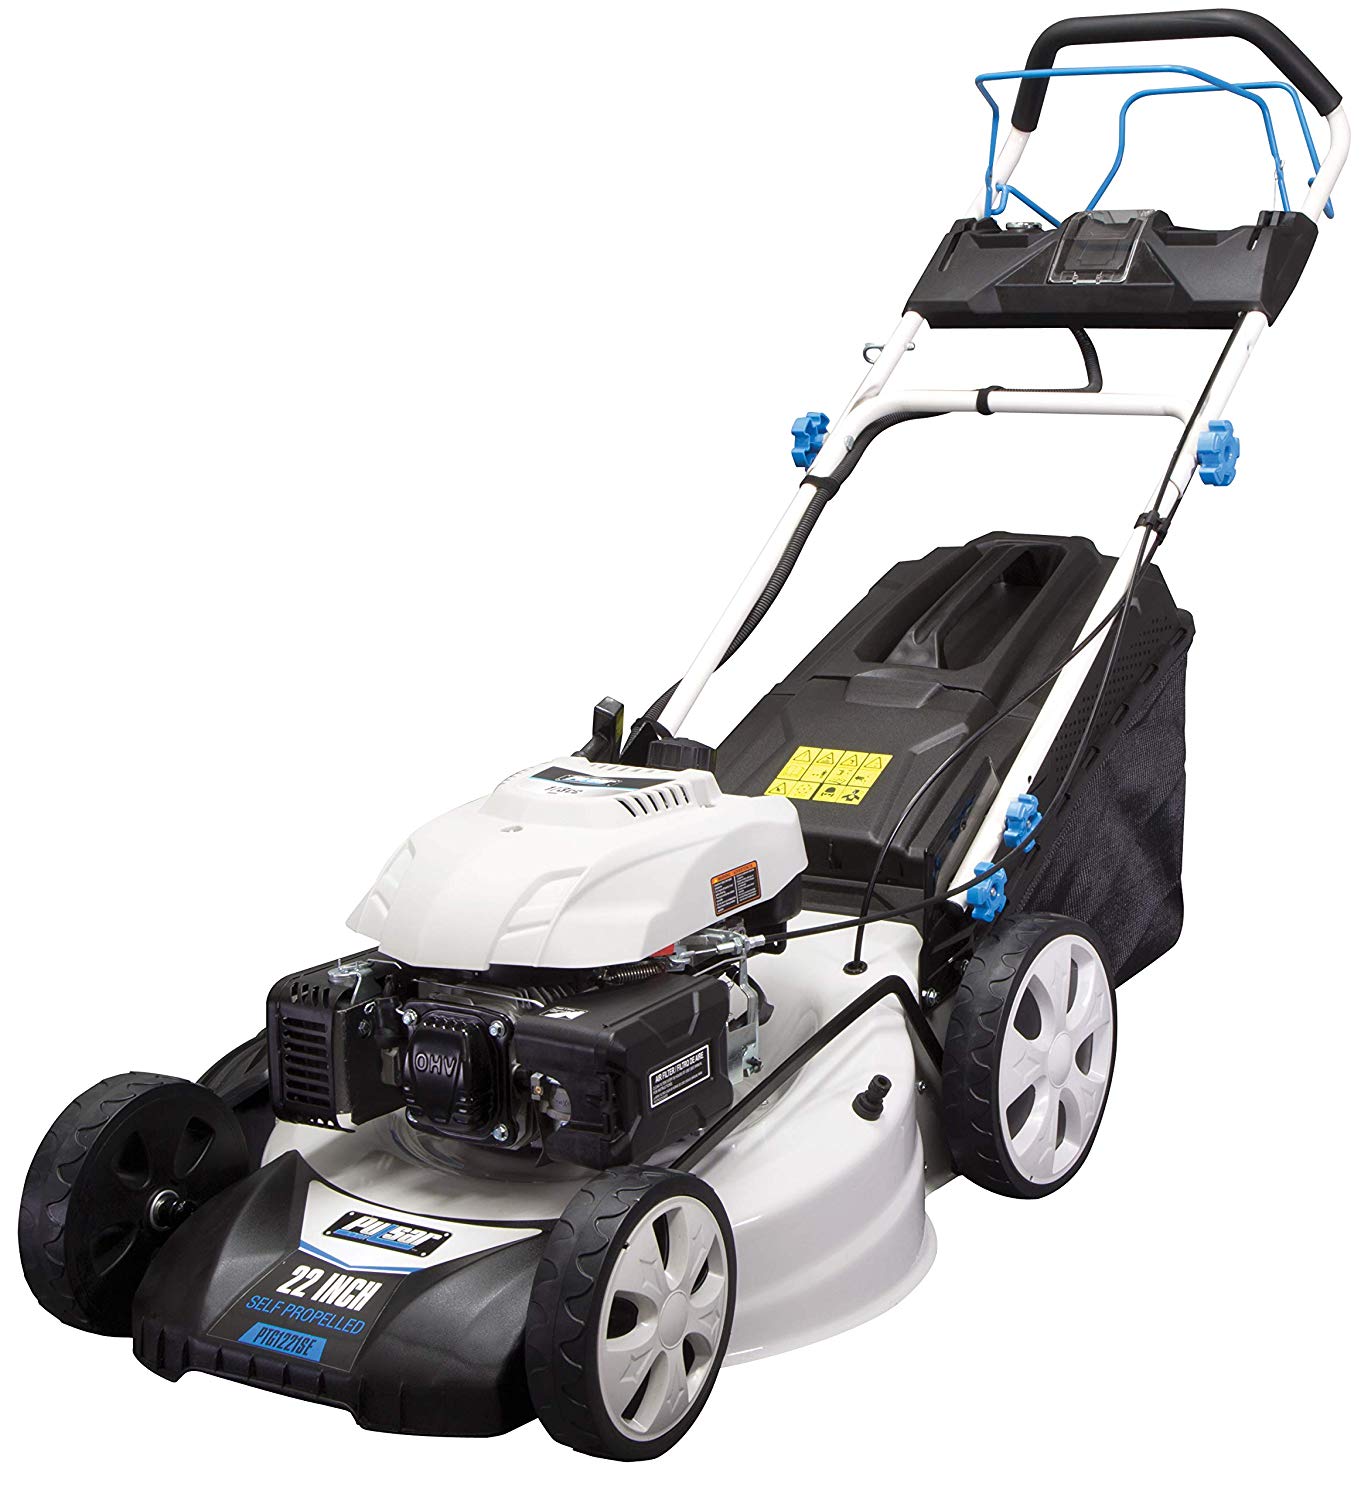 Pulsar 21” Self-Propelled Gasoline Powered Lawn Mower with 7 Position Height Adjustment, PTG1221SE